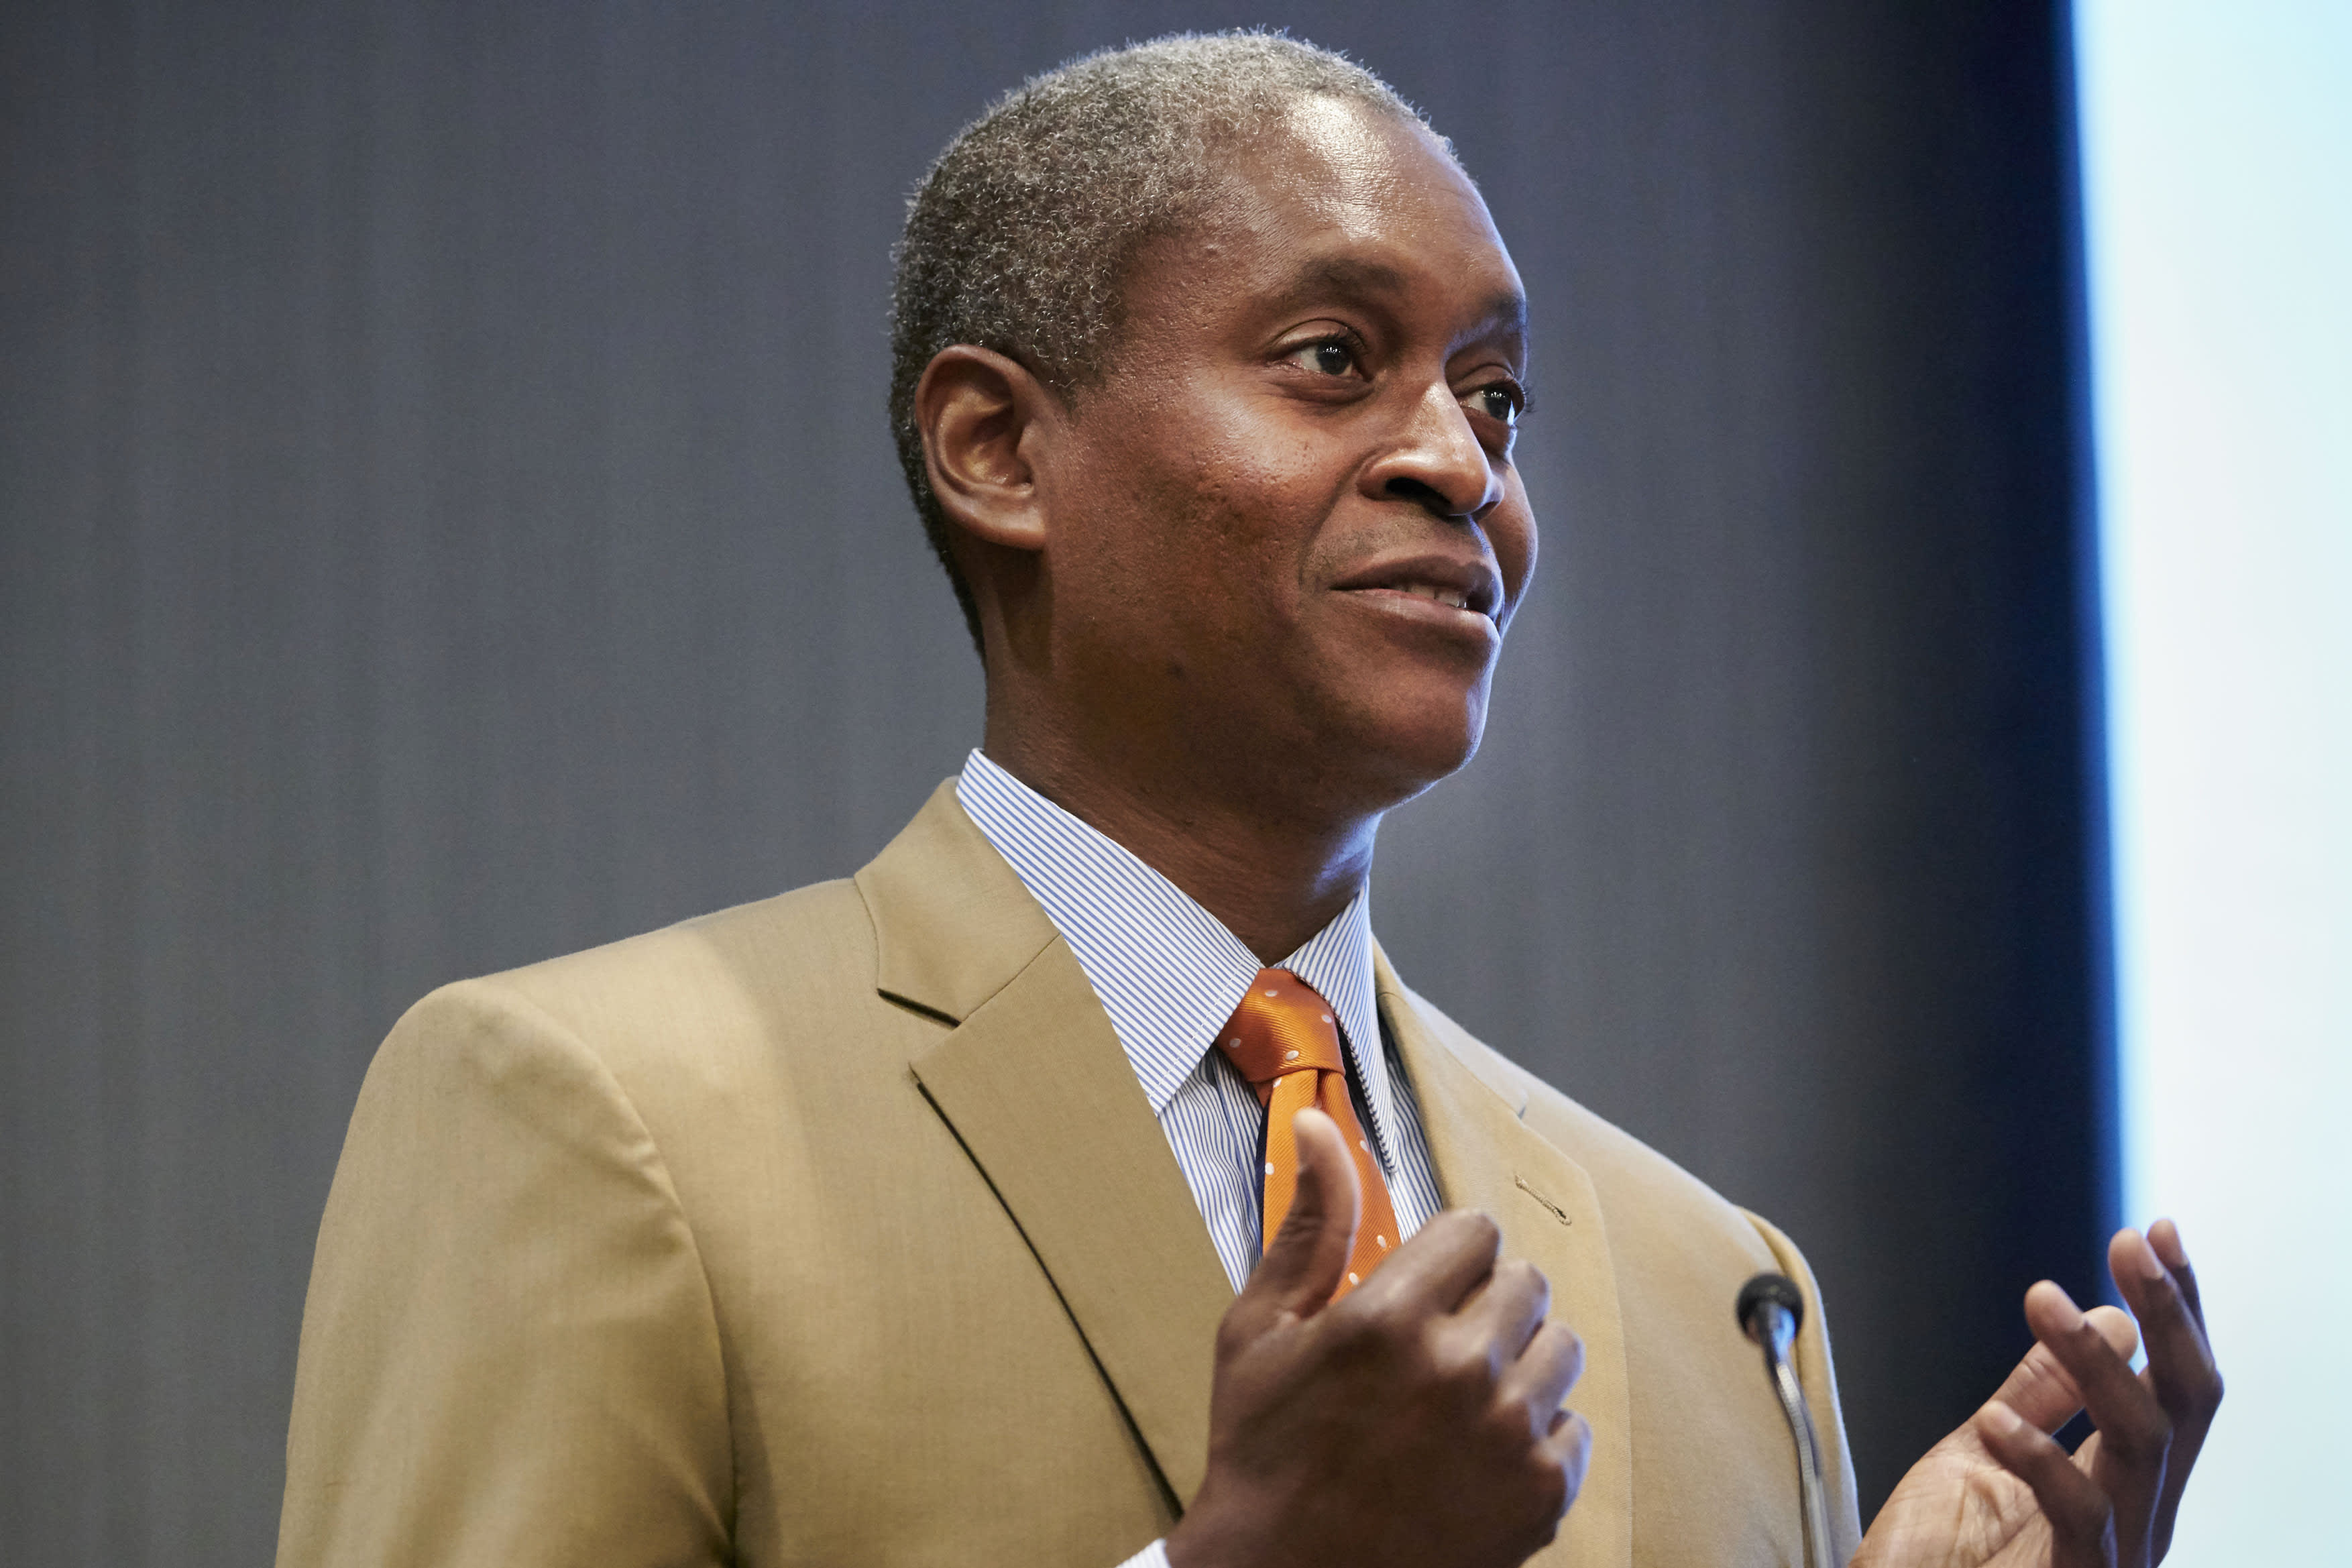 Bostic, the Fed, says the economy could return sooner than expected